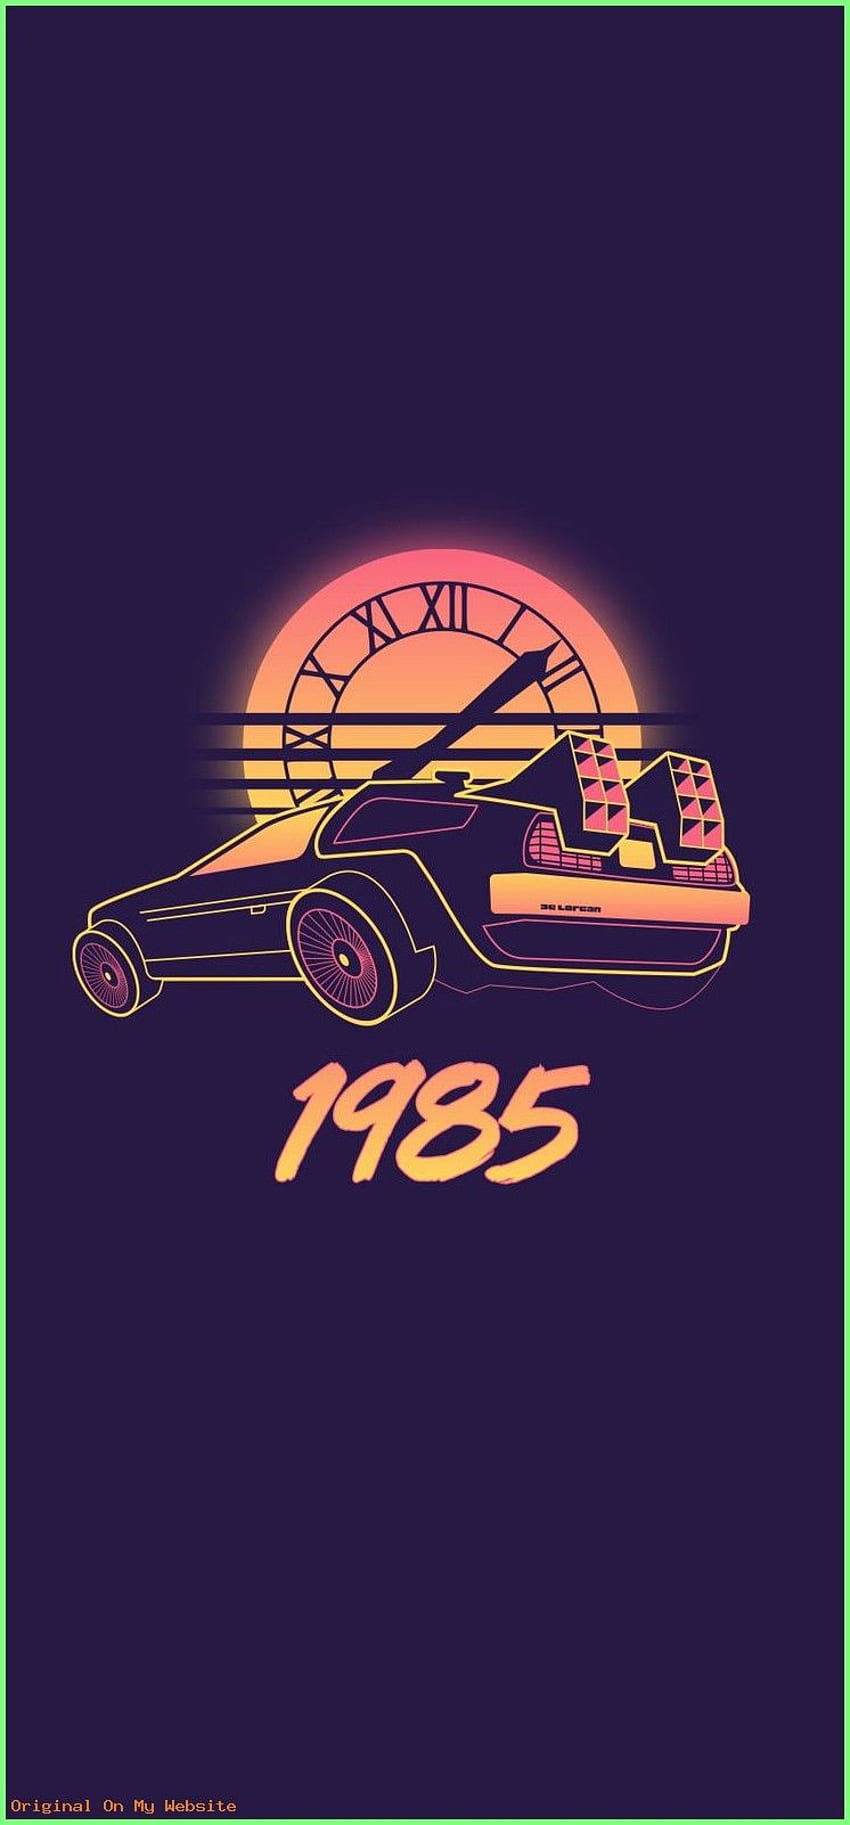 Back To The Future DeLorean Marty McFly HD Wallpaper  Eyecandy for your  XFCEDesktop  xfcelookorg